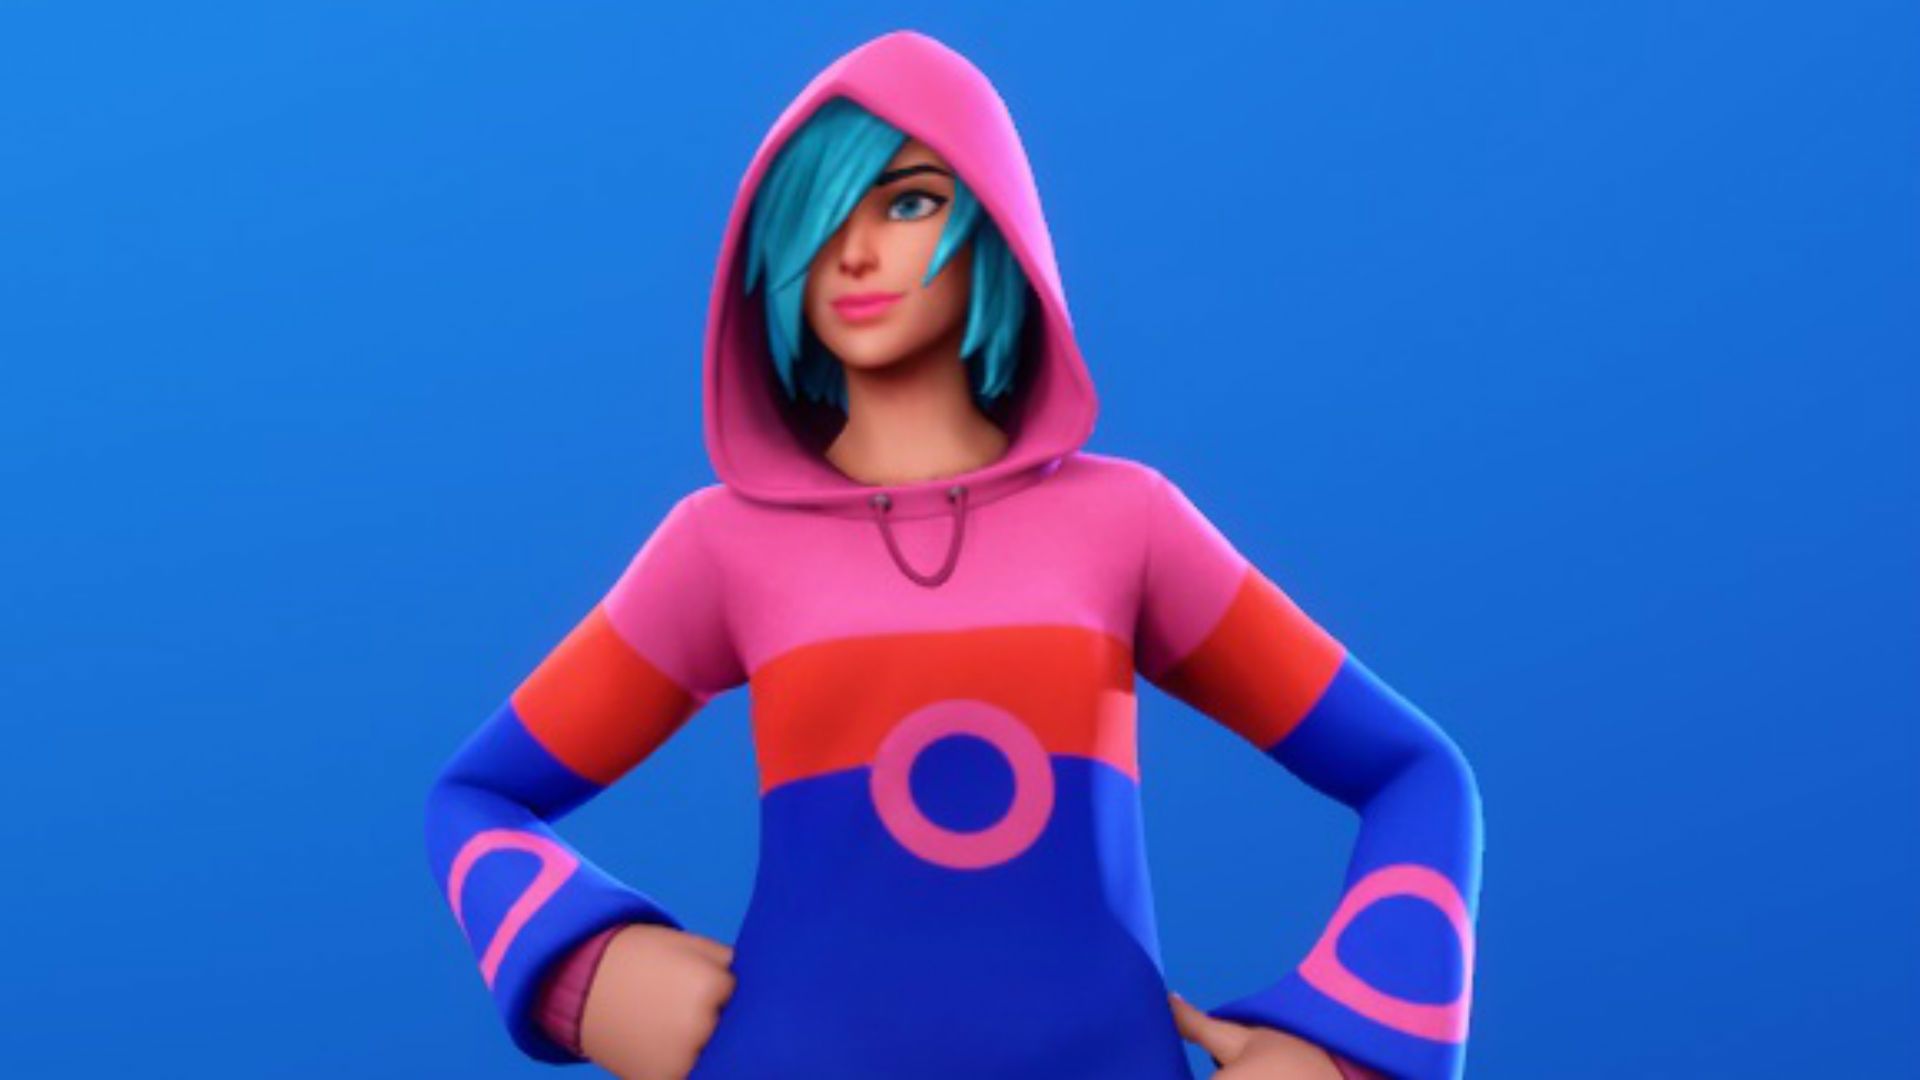 Fortnite item shop: Take a bite out of crime with these new skins